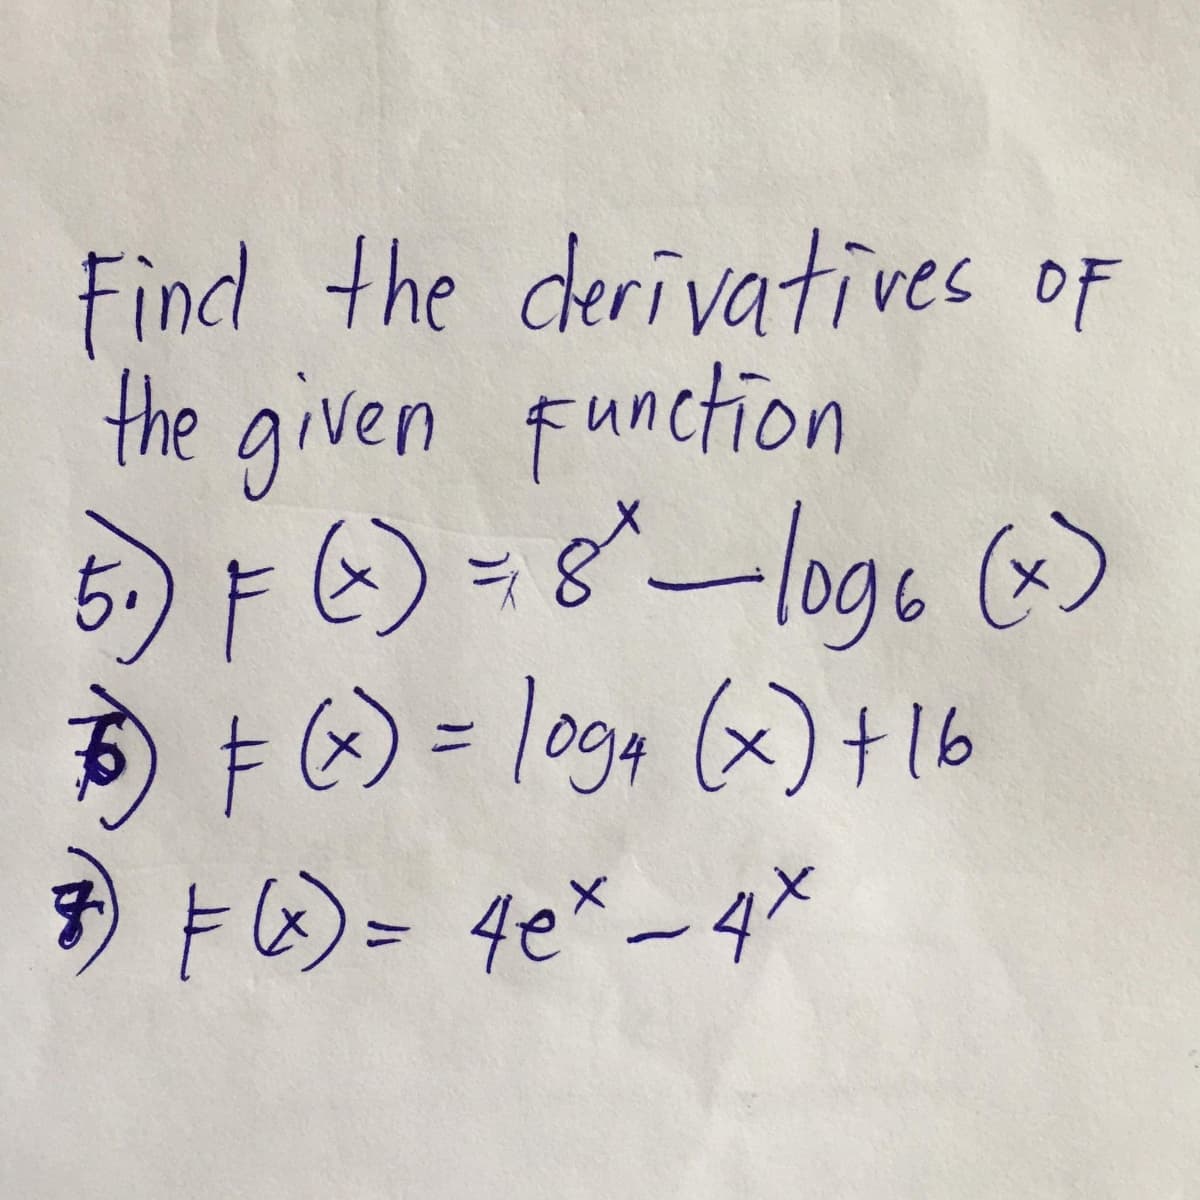 Find the derivatives oF
the given function
5) F6) = 8-loge (>
(x)
D + 6) = lo94 (x)+l16
